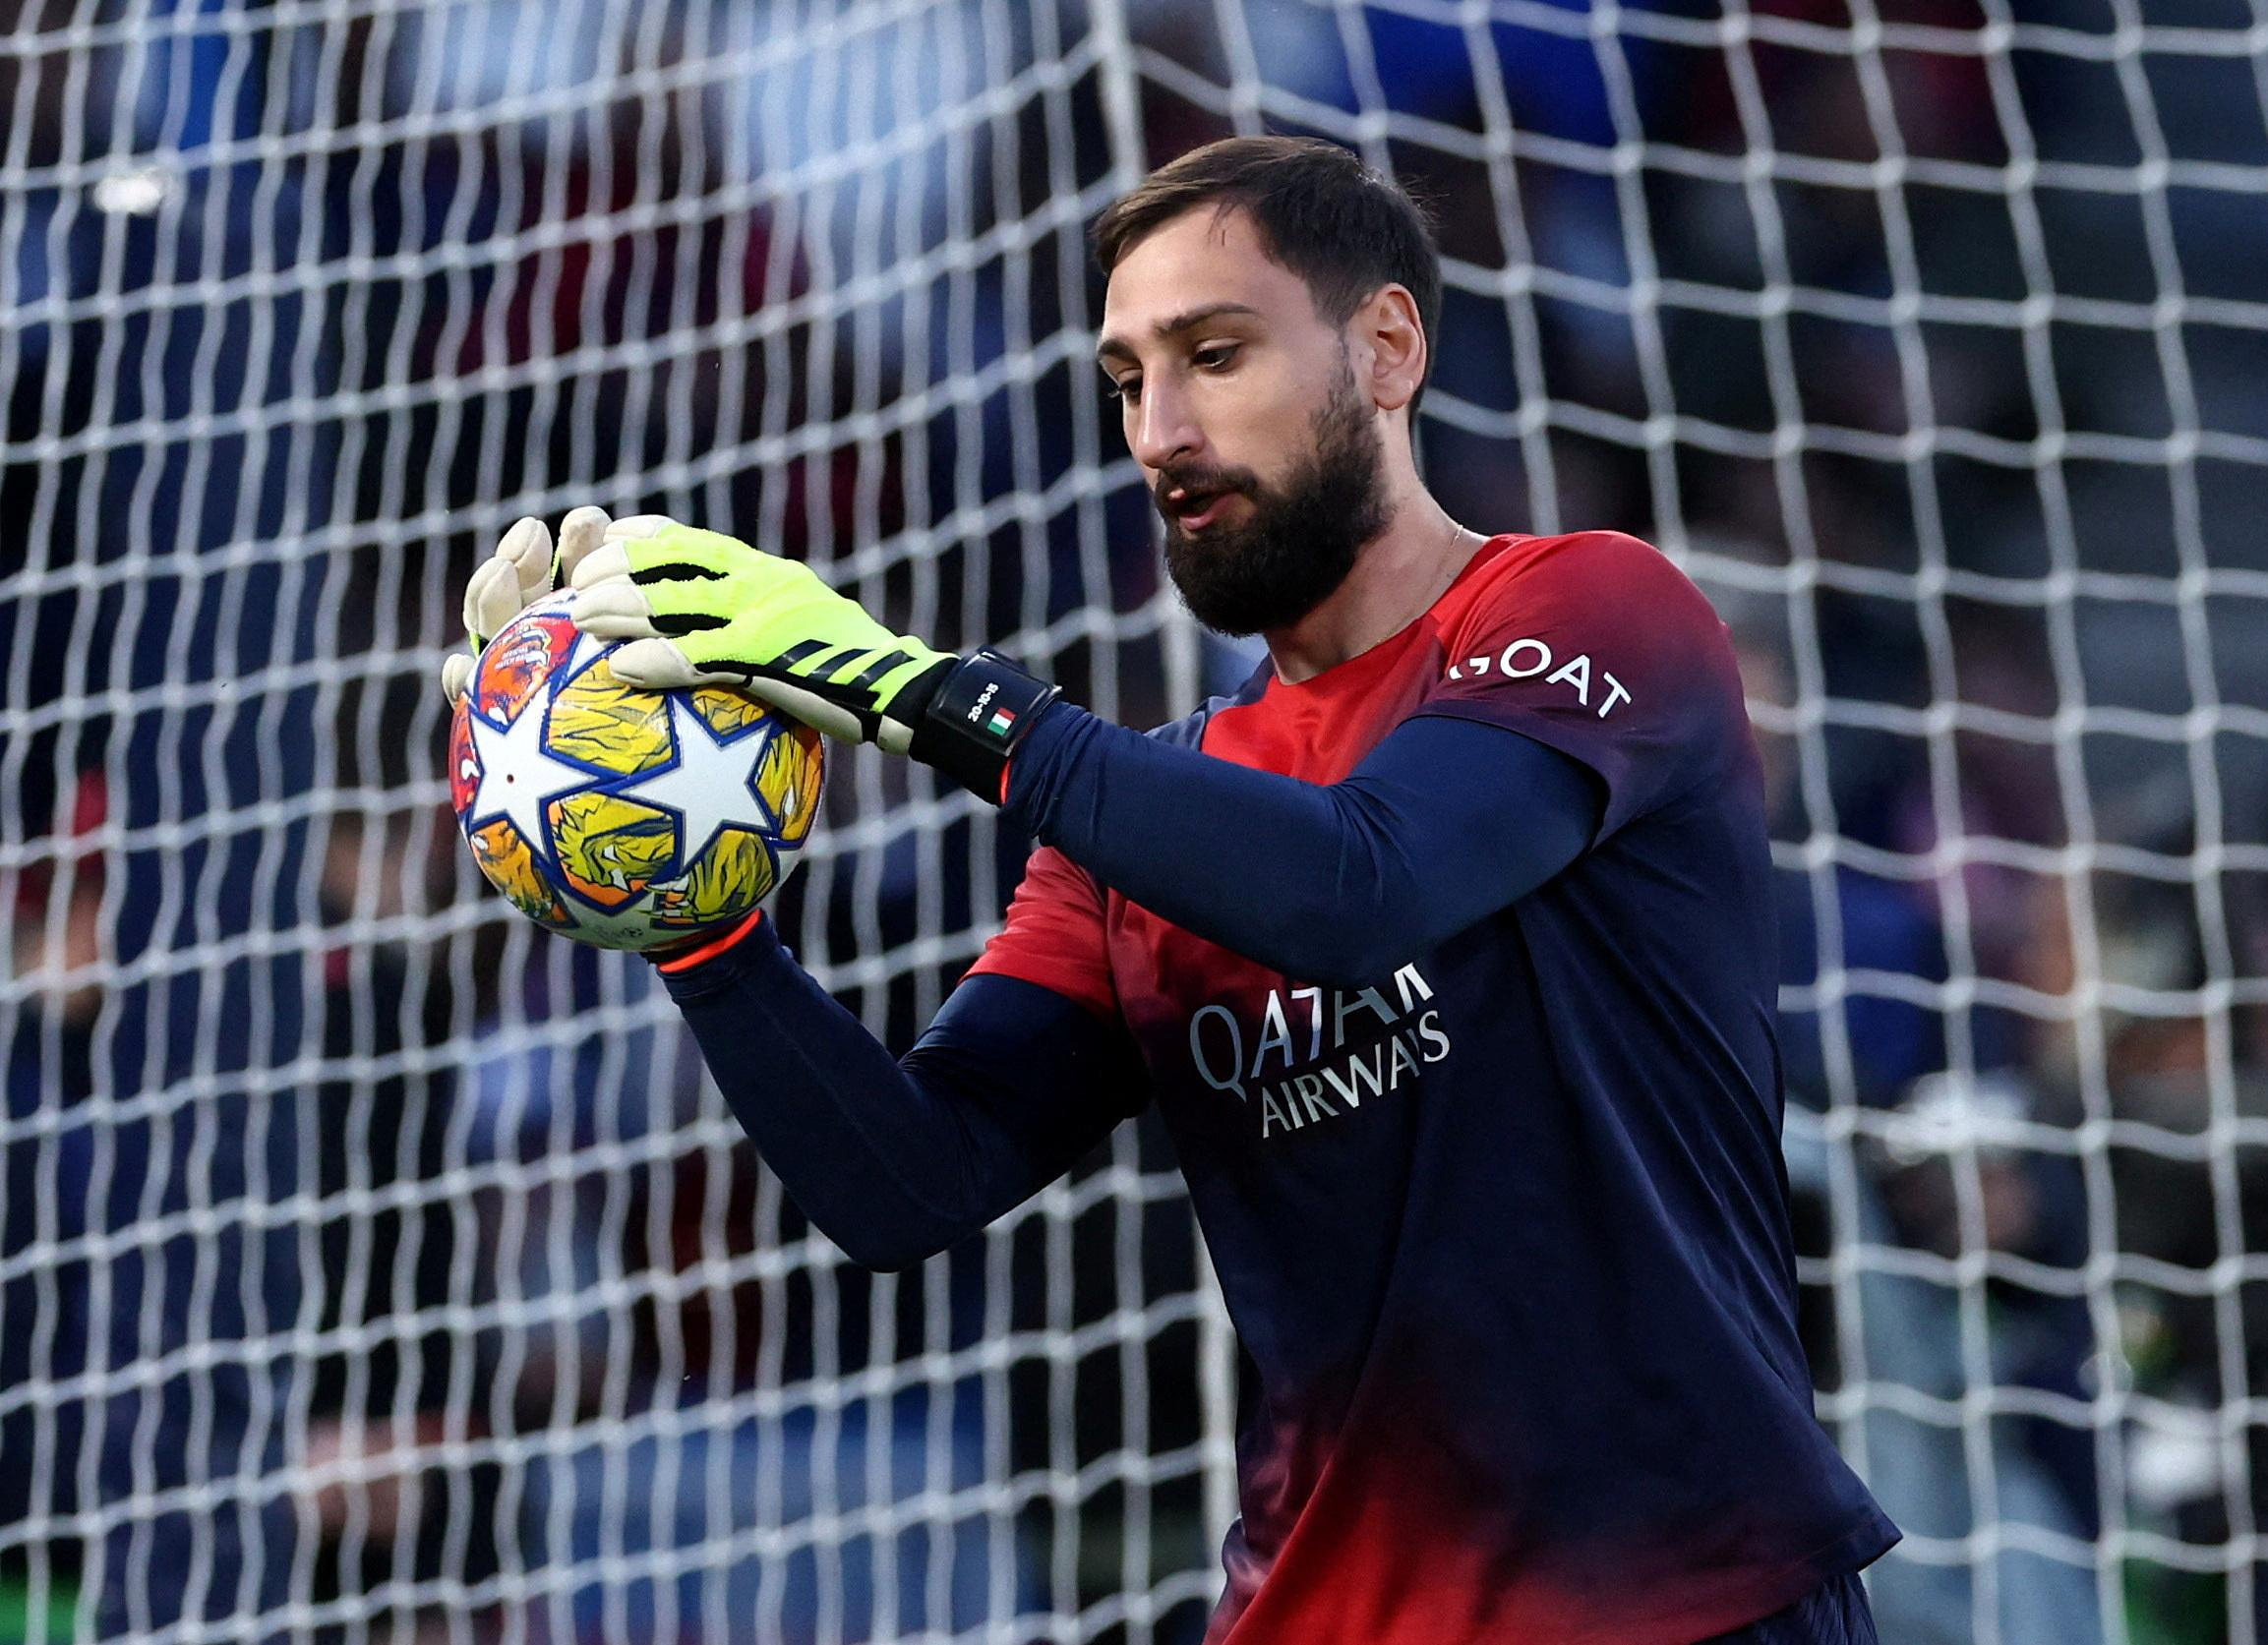 Football: 4 men presented to a judge after the homejacking of PSG goalkeeper Donnarumma